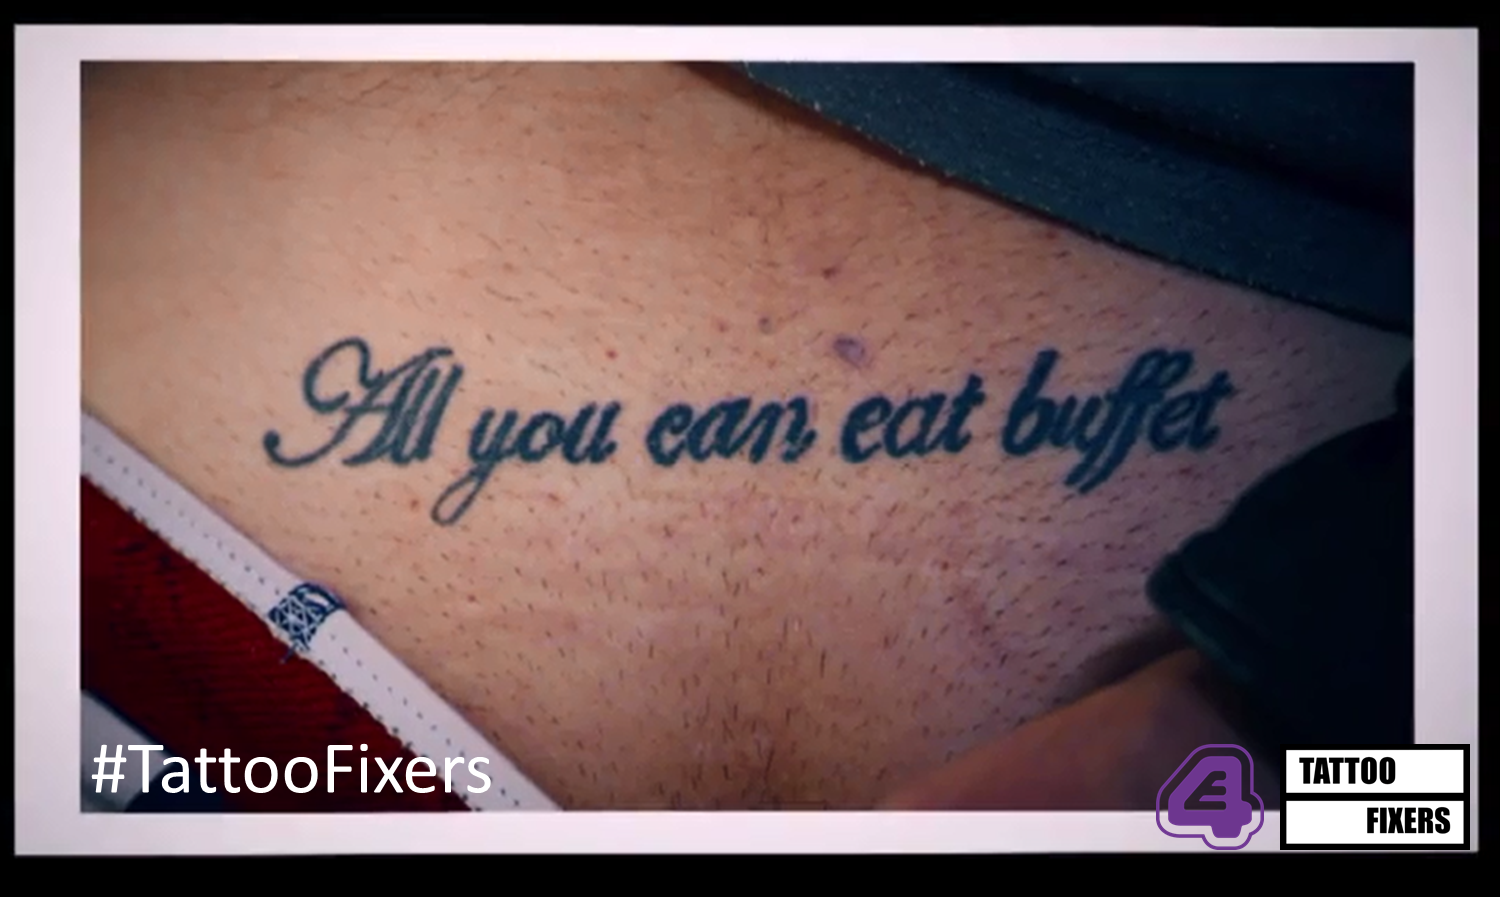 All you can eat tattoo